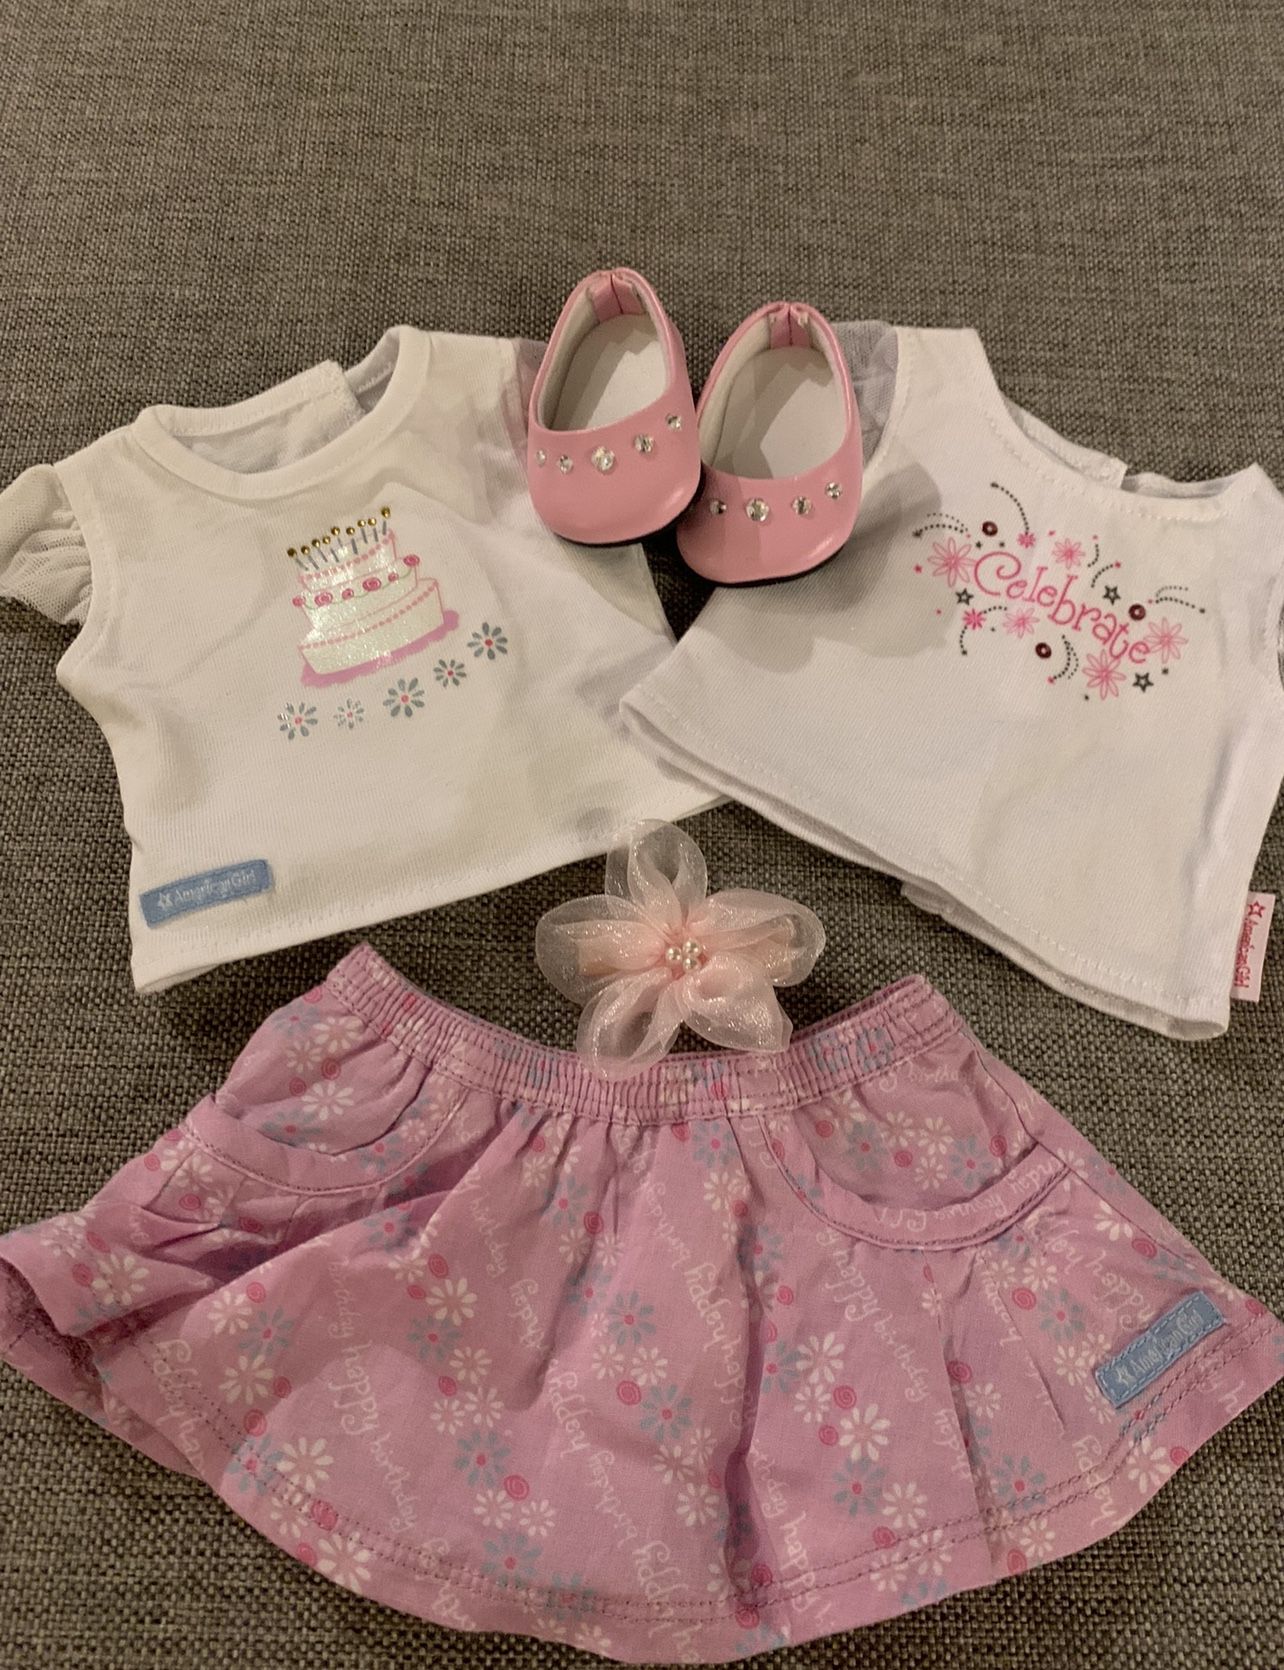 American Girl Doll Birthday Outfit With Shoes And Hair Clip 